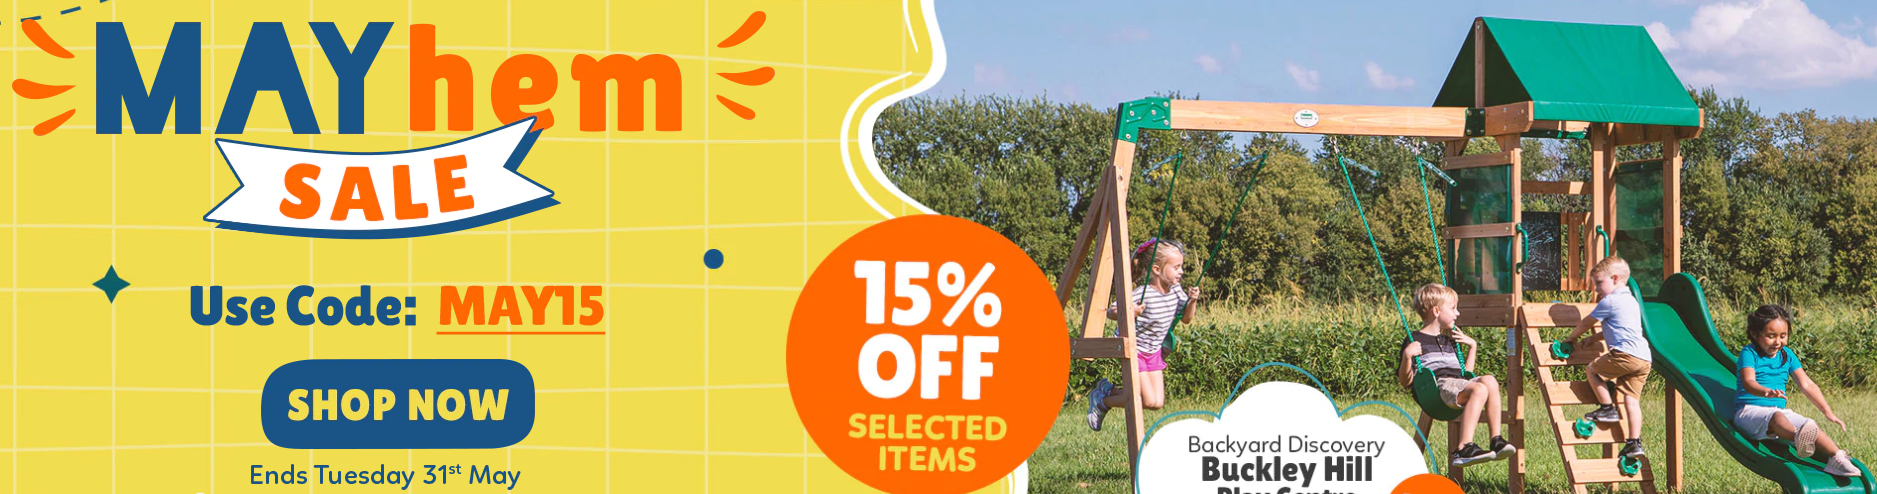 Lifespan Kids Mayhem sale - 15% OFF on selected items with discount code